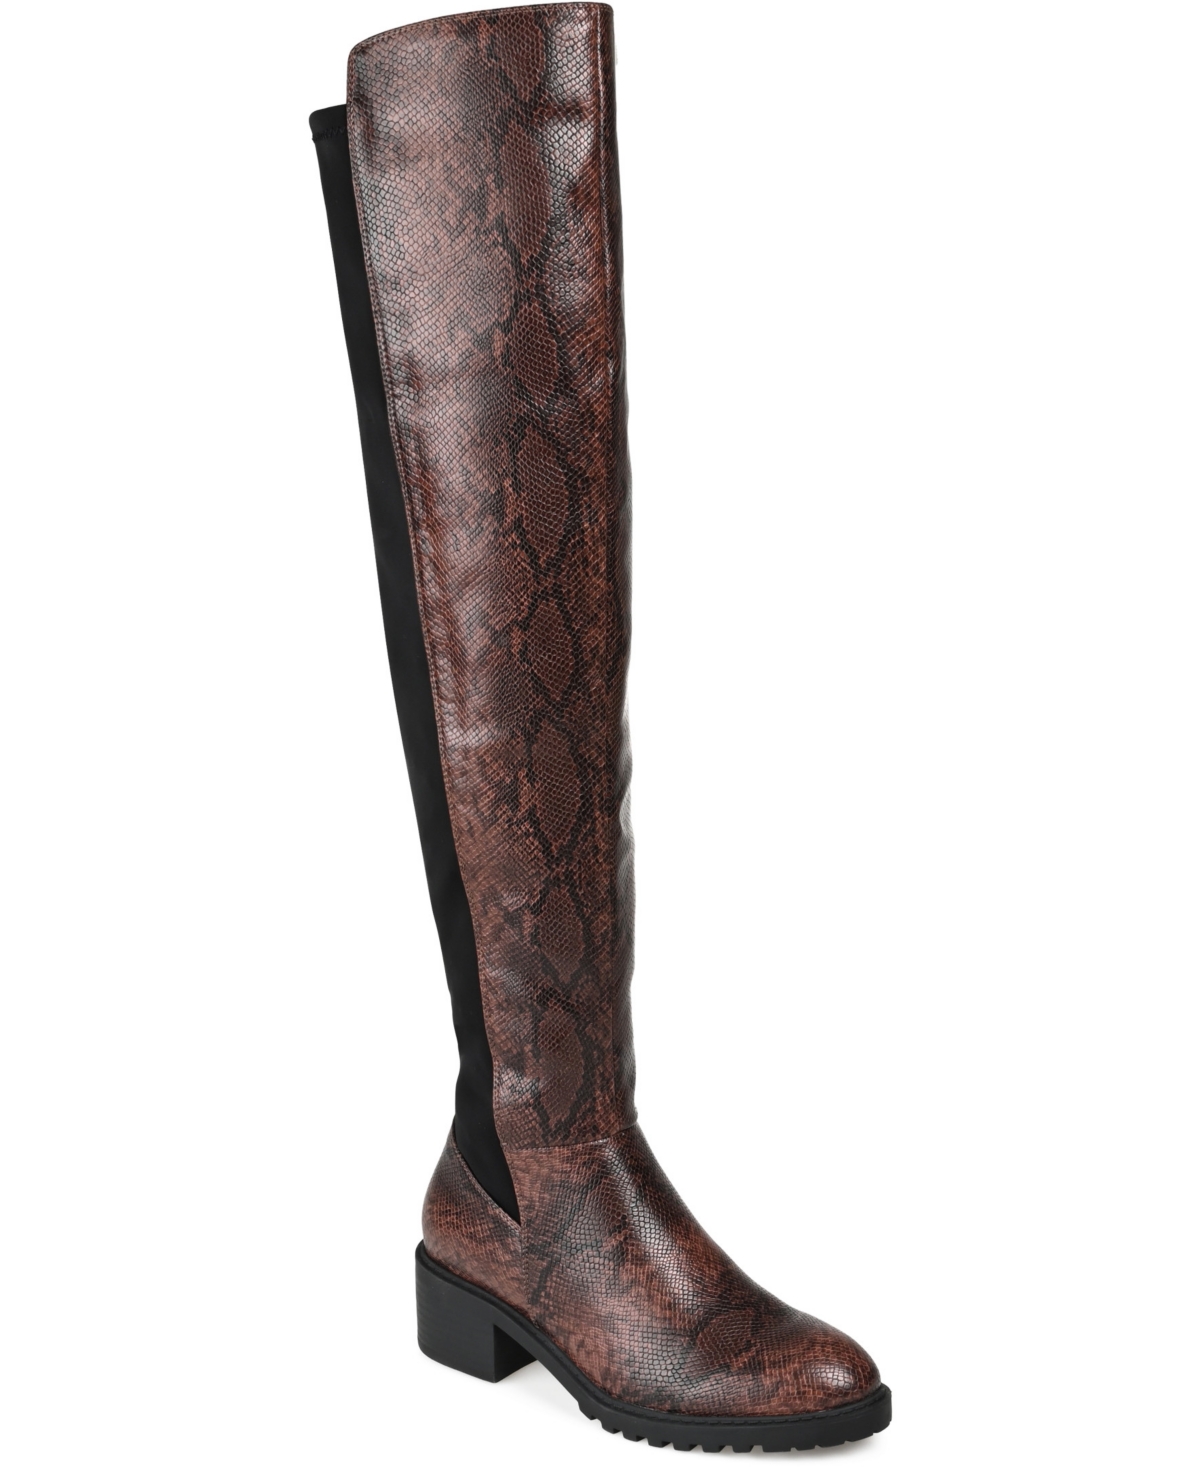 Women's Aryia Extra Wide Calf Boots - Snake